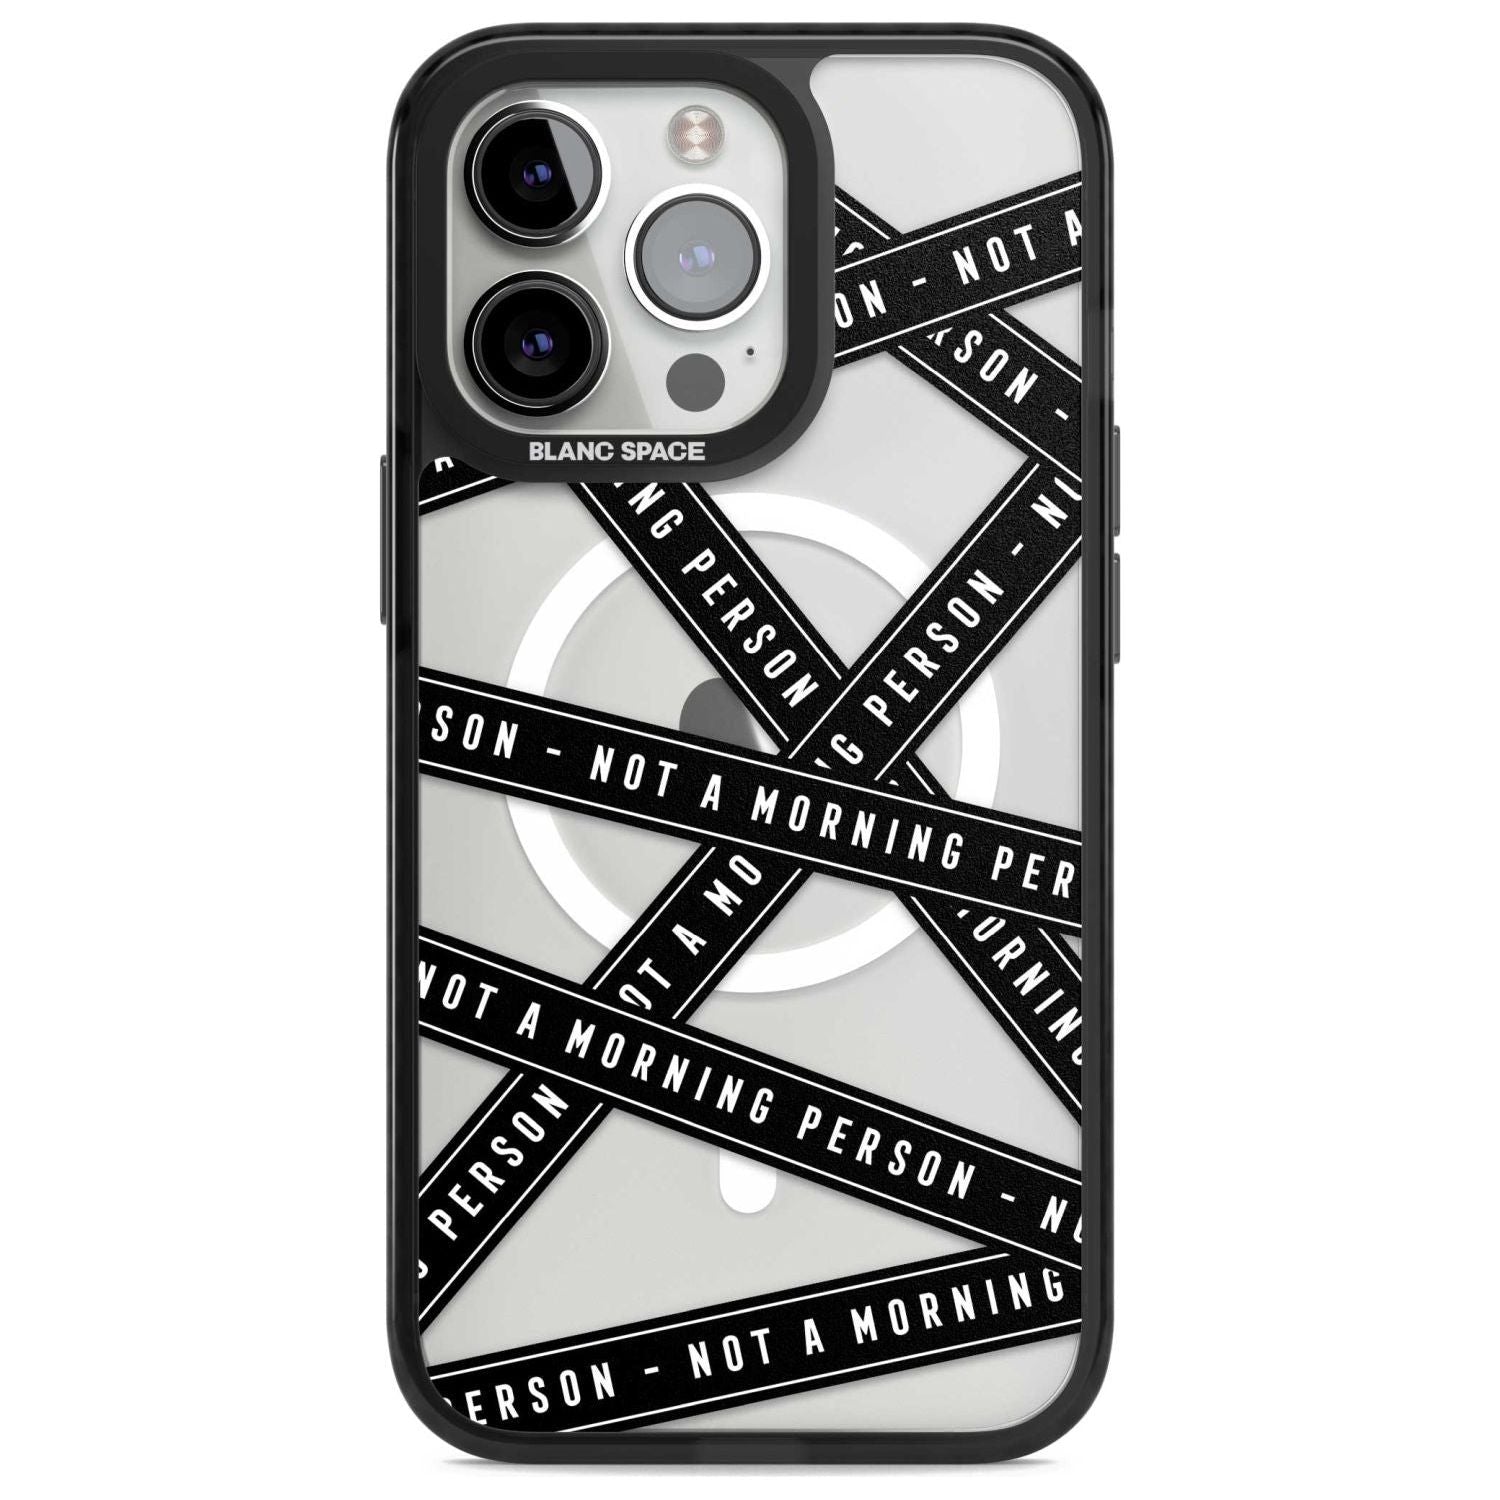 Caution Tape (Clear) Not a Morning Person Phone Case iPhone 15 Pro Max / Magsafe Black Impact Case,iPhone 15 Pro / Magsafe Black Impact Case,iPhone 14 Pro Max / Magsafe Black Impact Case,iPhone 14 Pro / Magsafe Black Impact Case,iPhone 13 Pro / Magsafe Black Impact Case Blanc Space